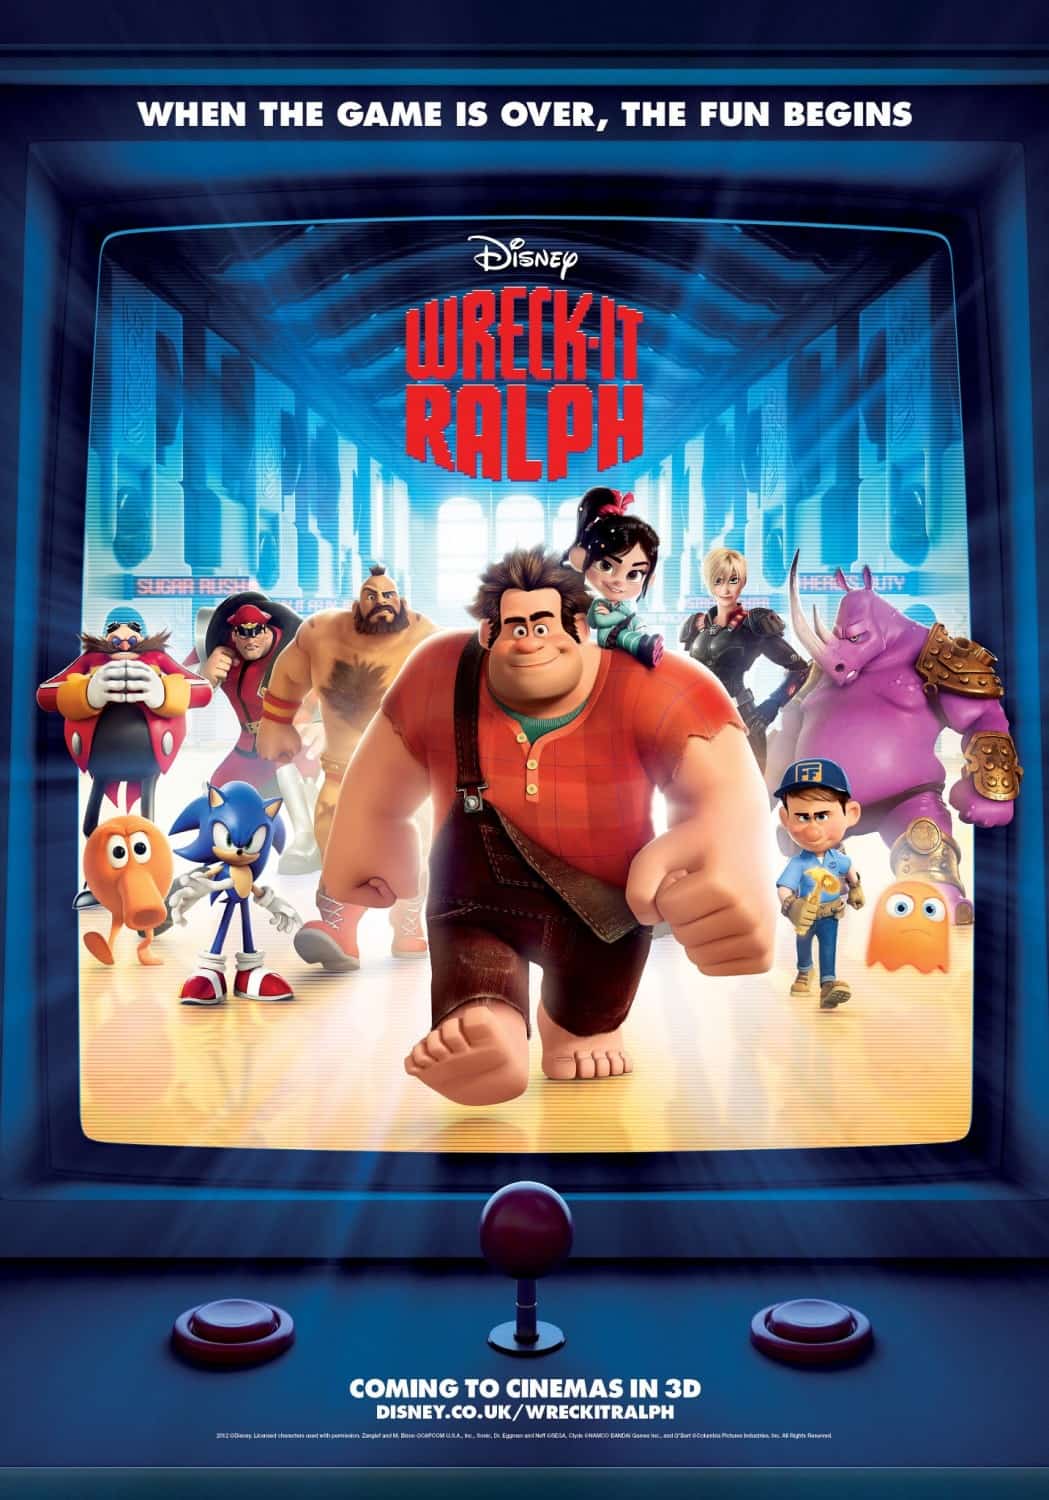 UK Box Office Report: Wreck-It Ralph tops Box Office for Disney